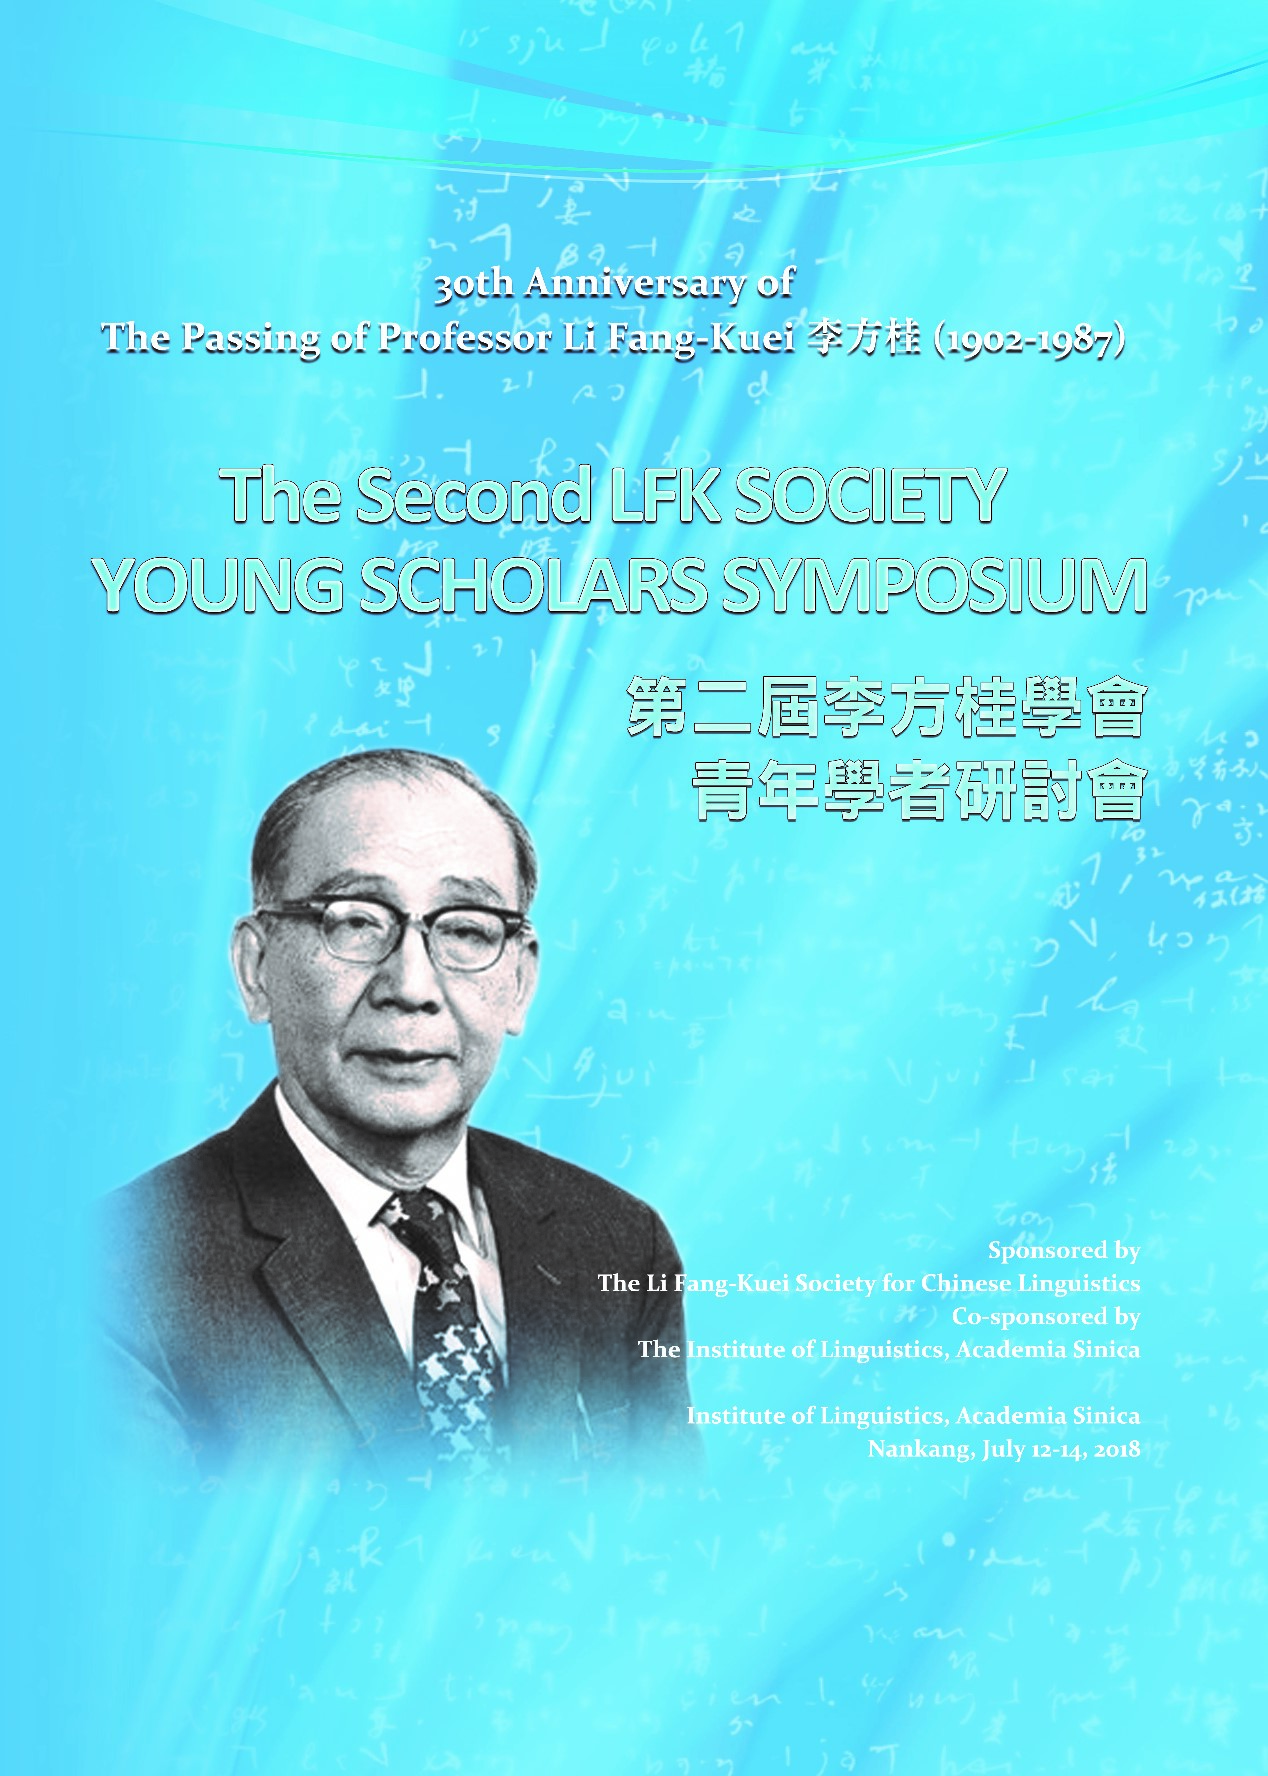 The Second LFK Society Young Scholar Symposium